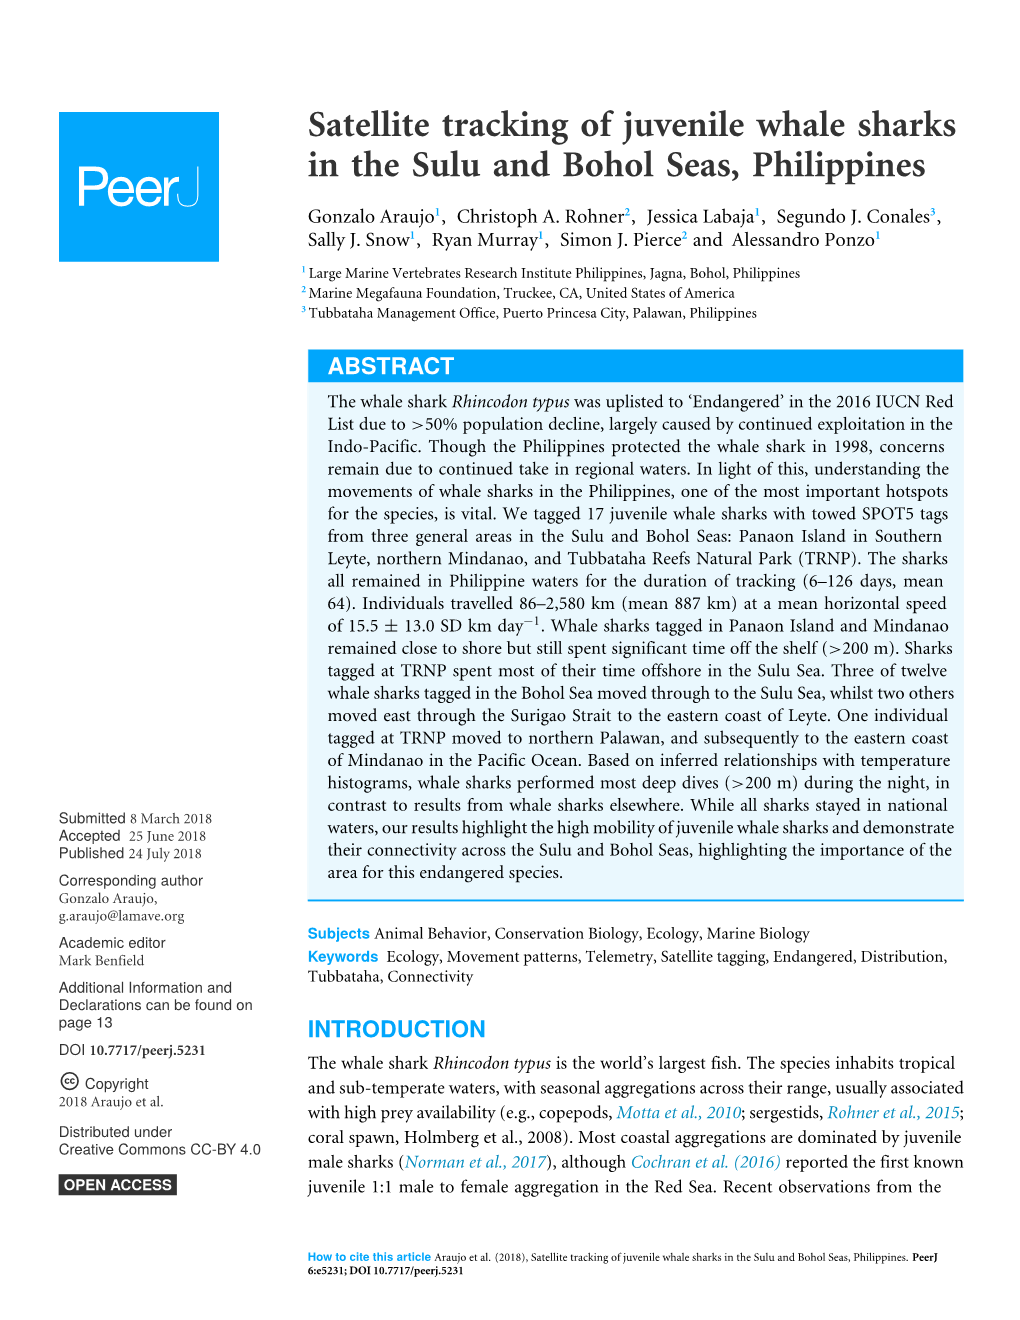 Satellite Tracking of Juvenile Whale Sharks in the Sulu and Bohol Seas, Philippines